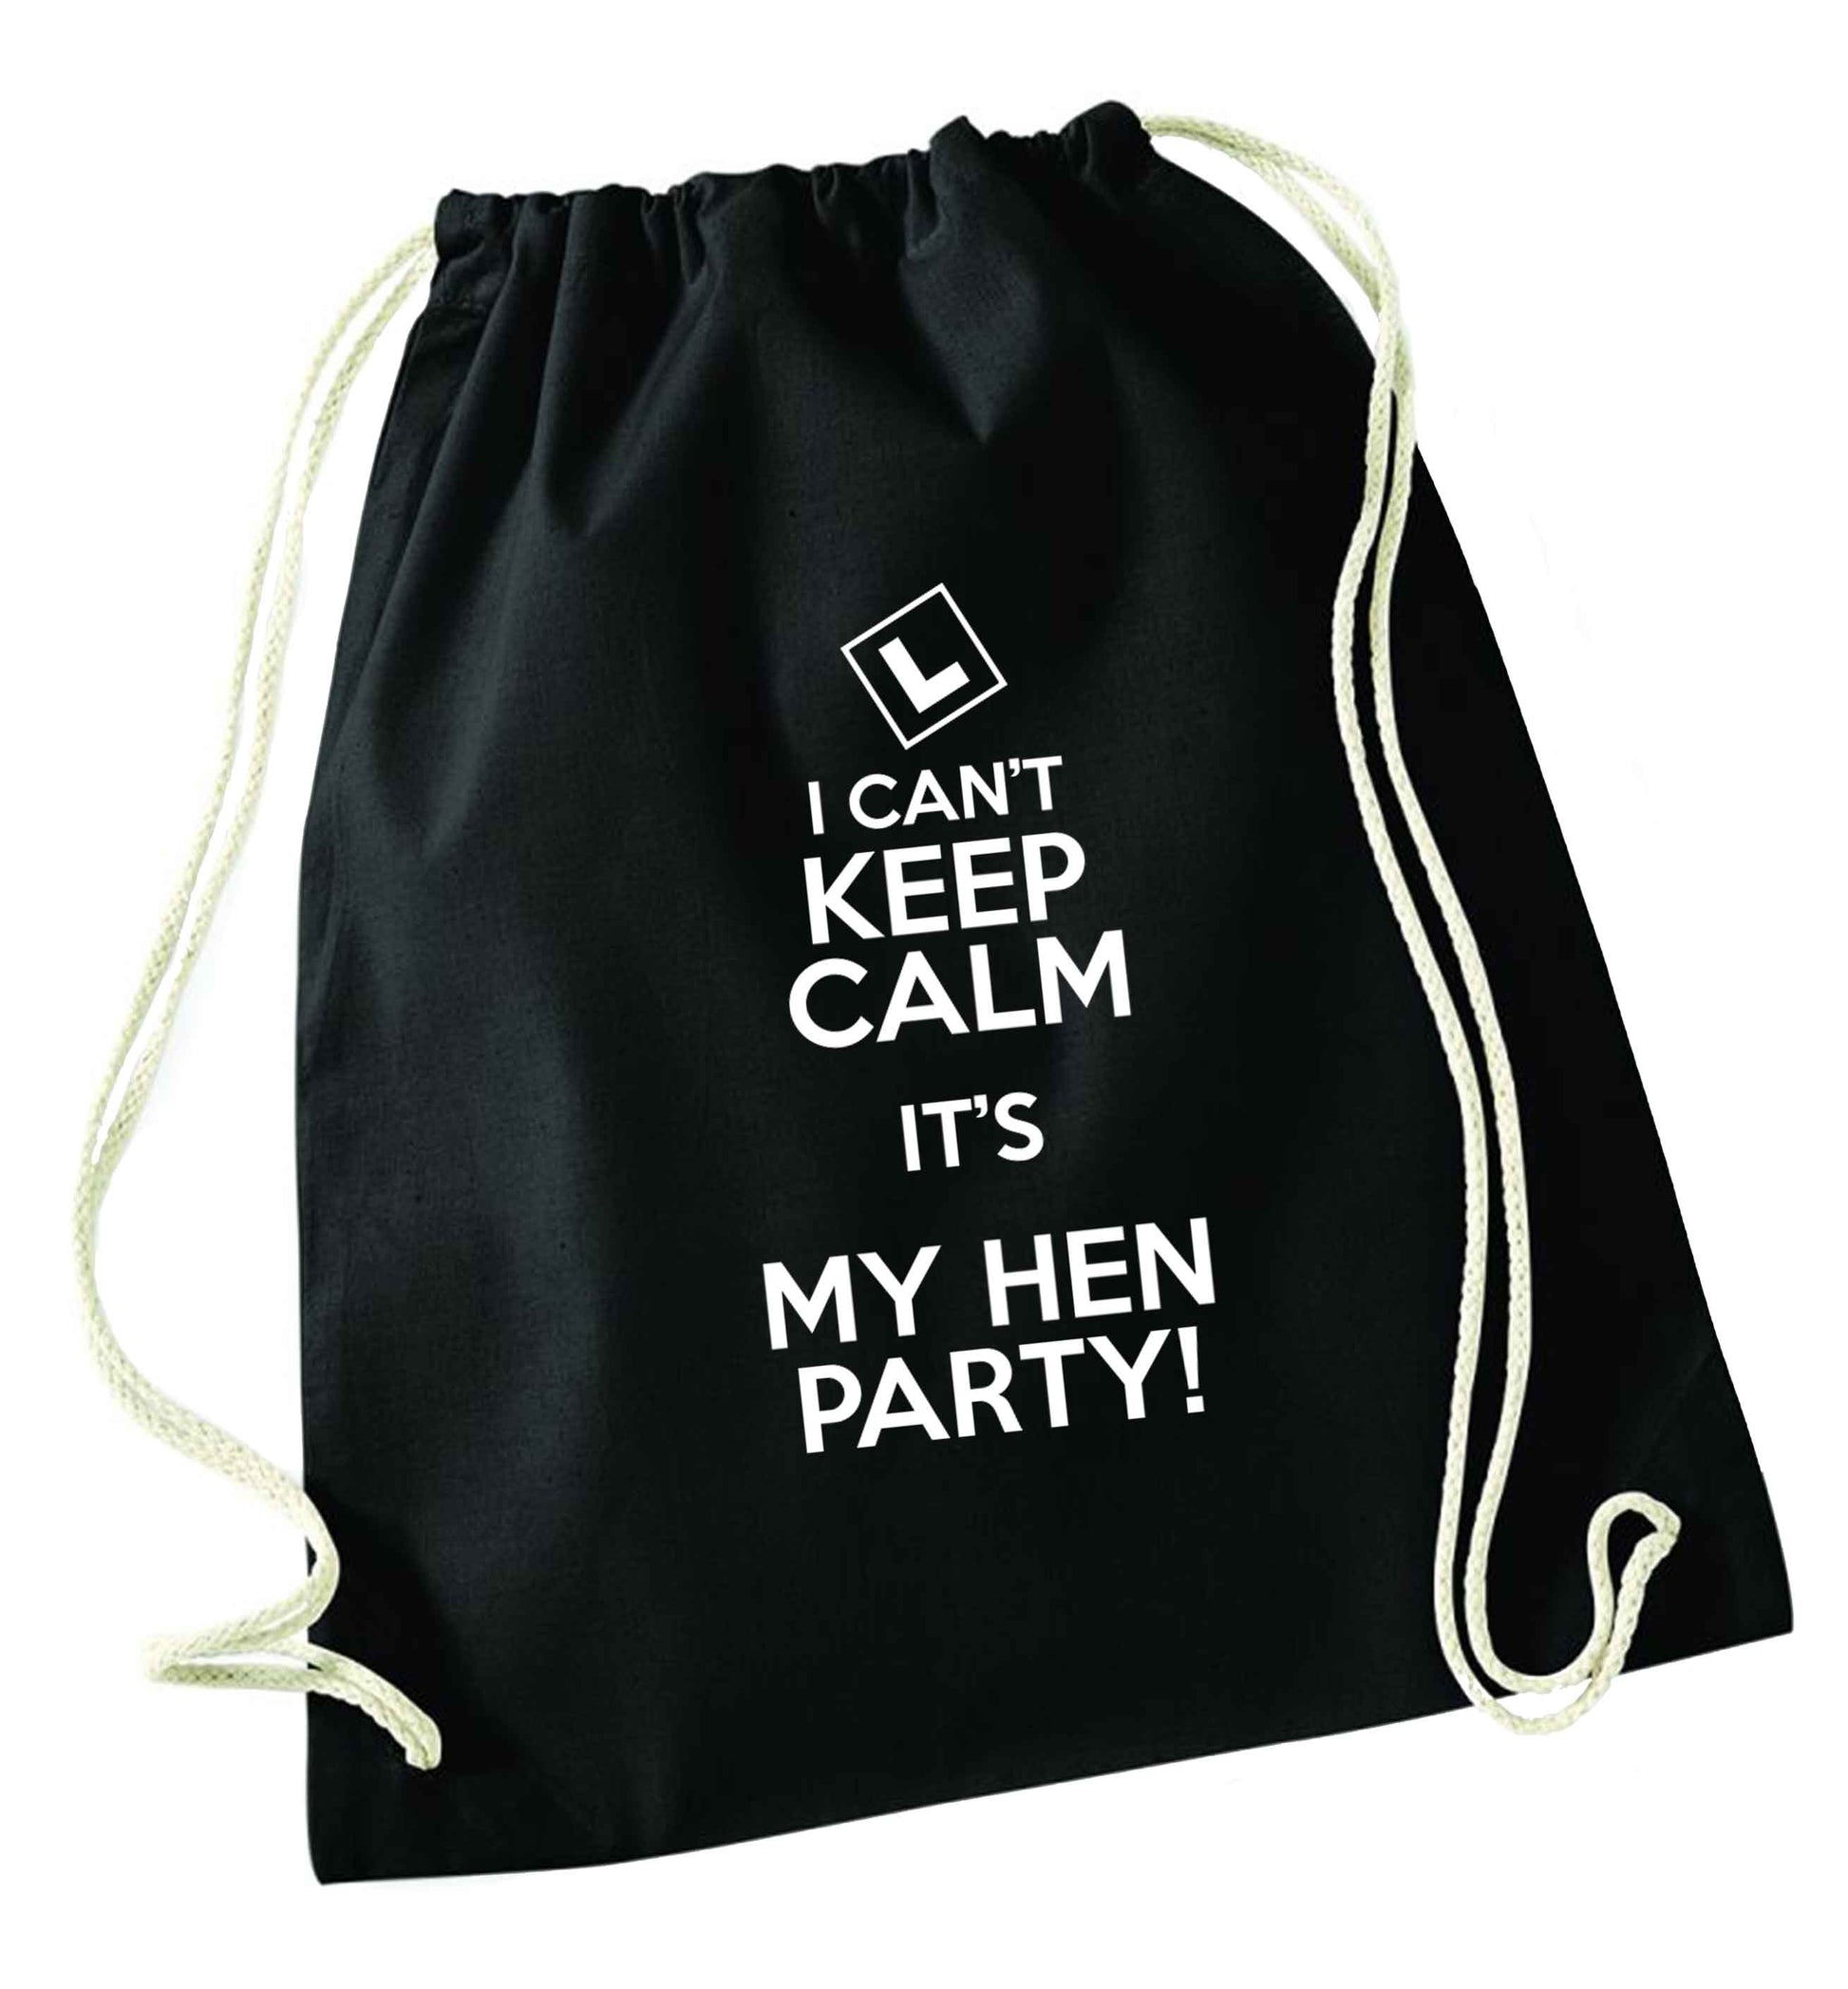 I can't keep calm it's my hen party black drawstring bag